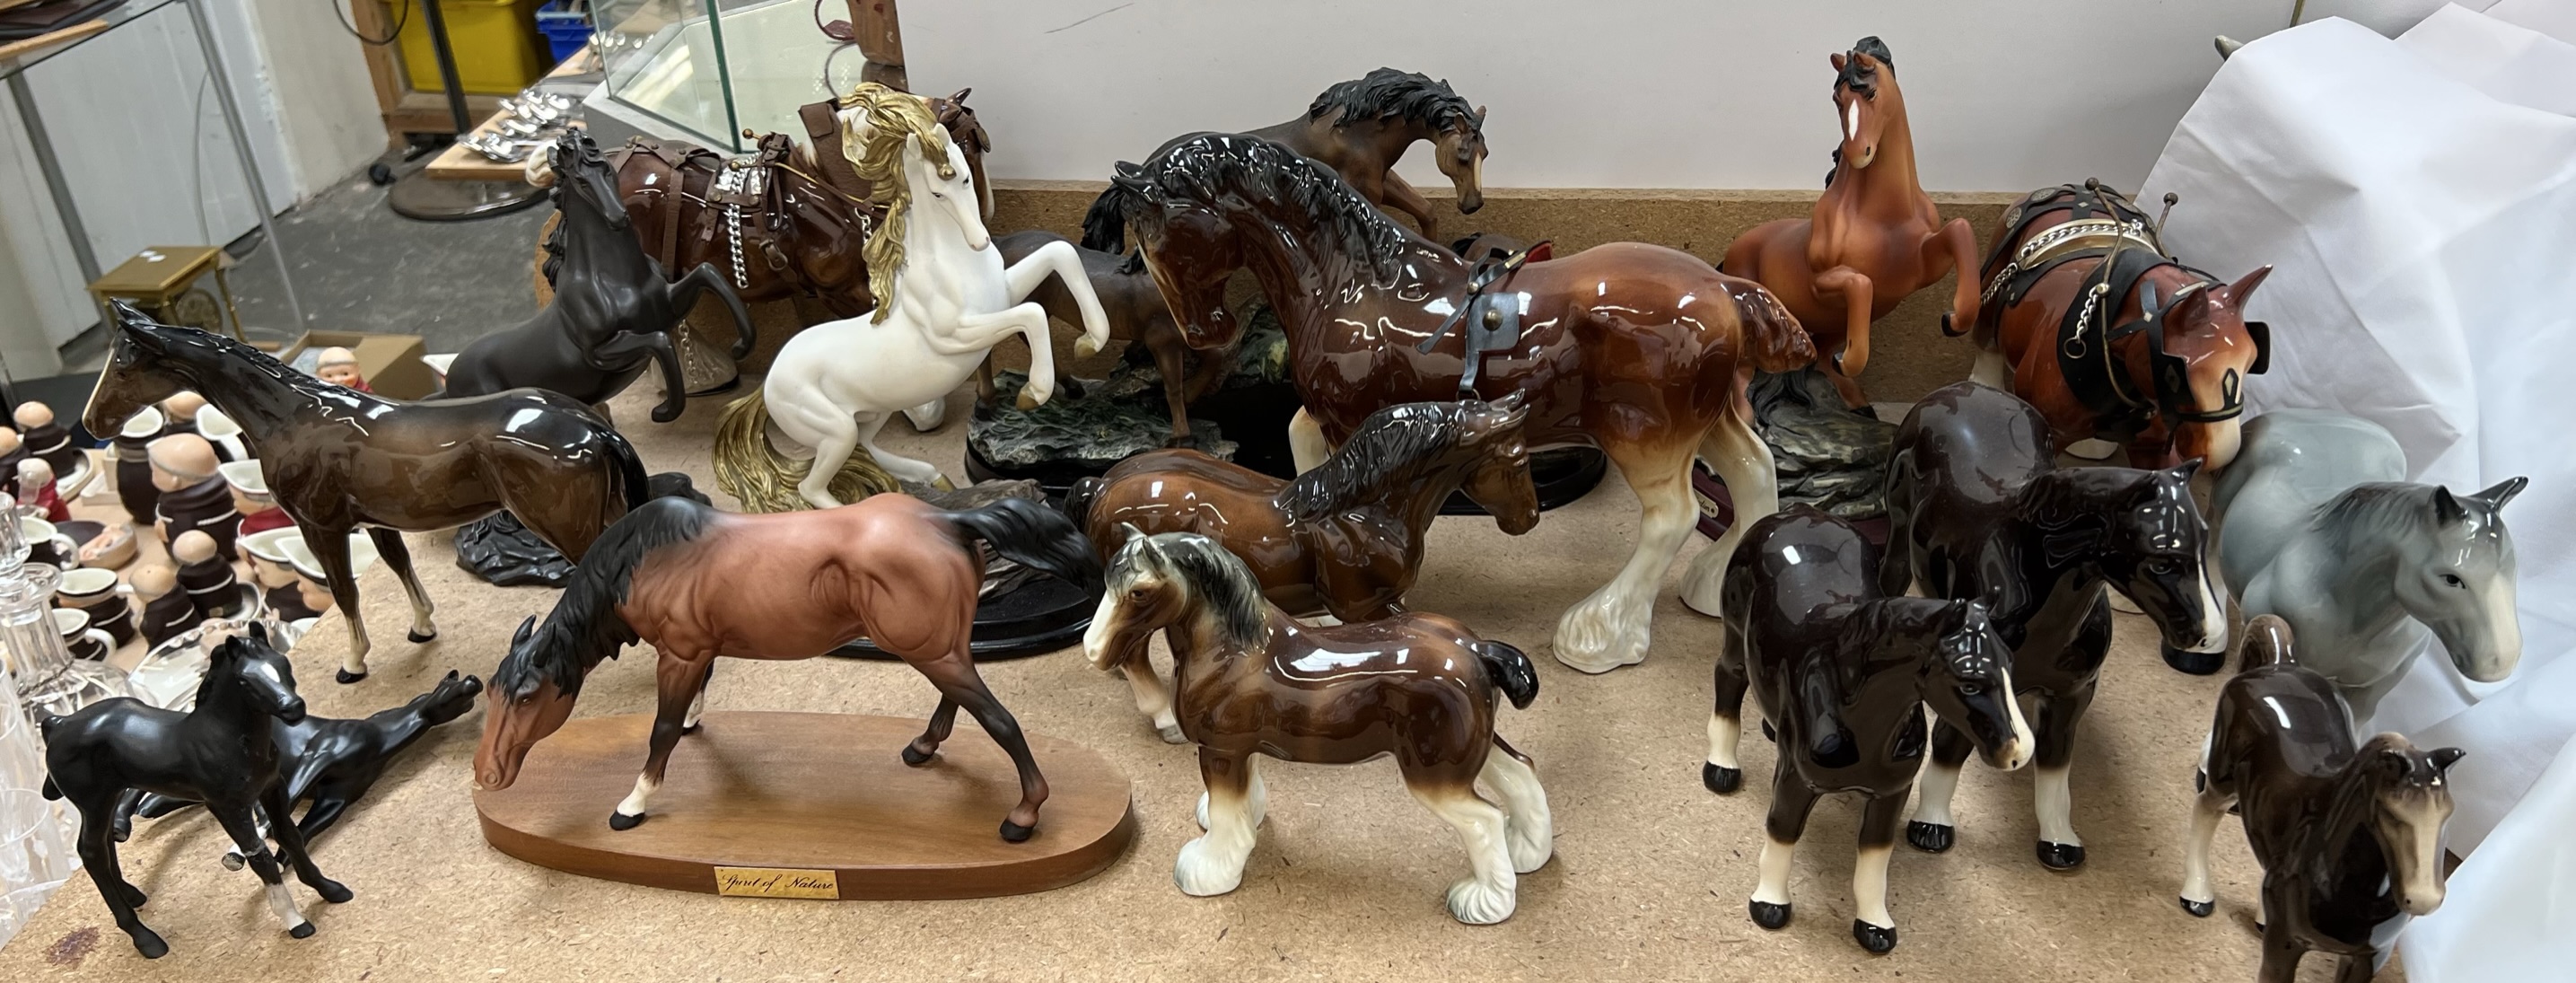 A Spirit of Nature porcelain horse together with a collection of models of horses